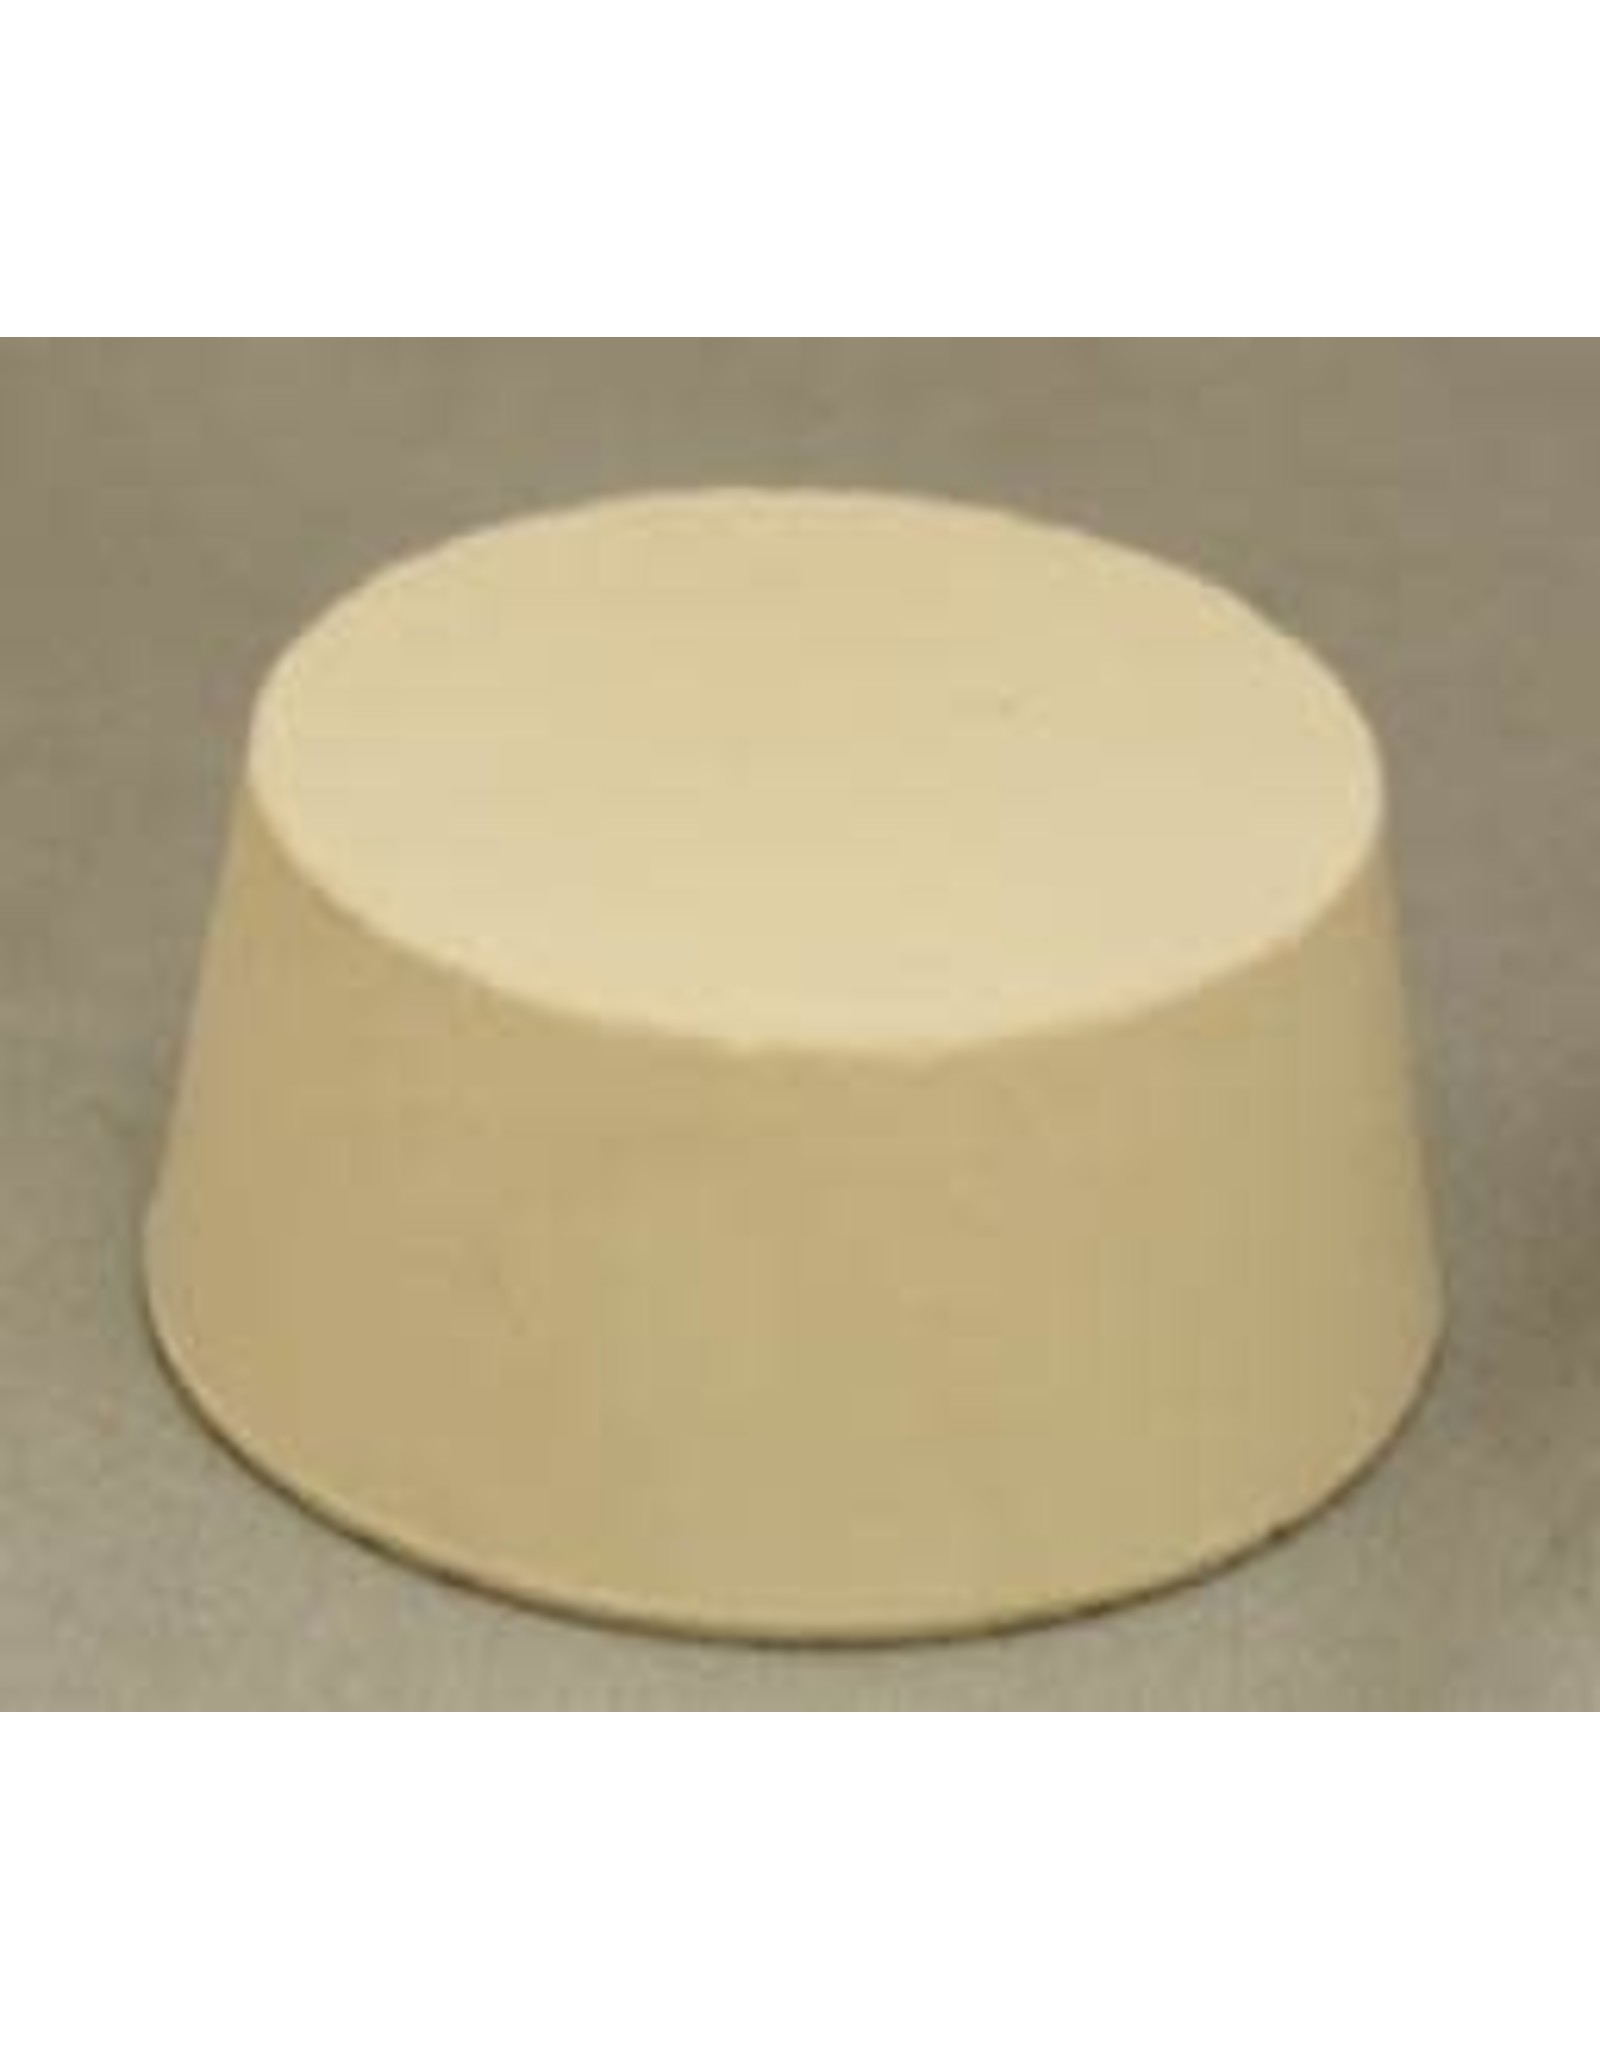 Solid rubber stopper